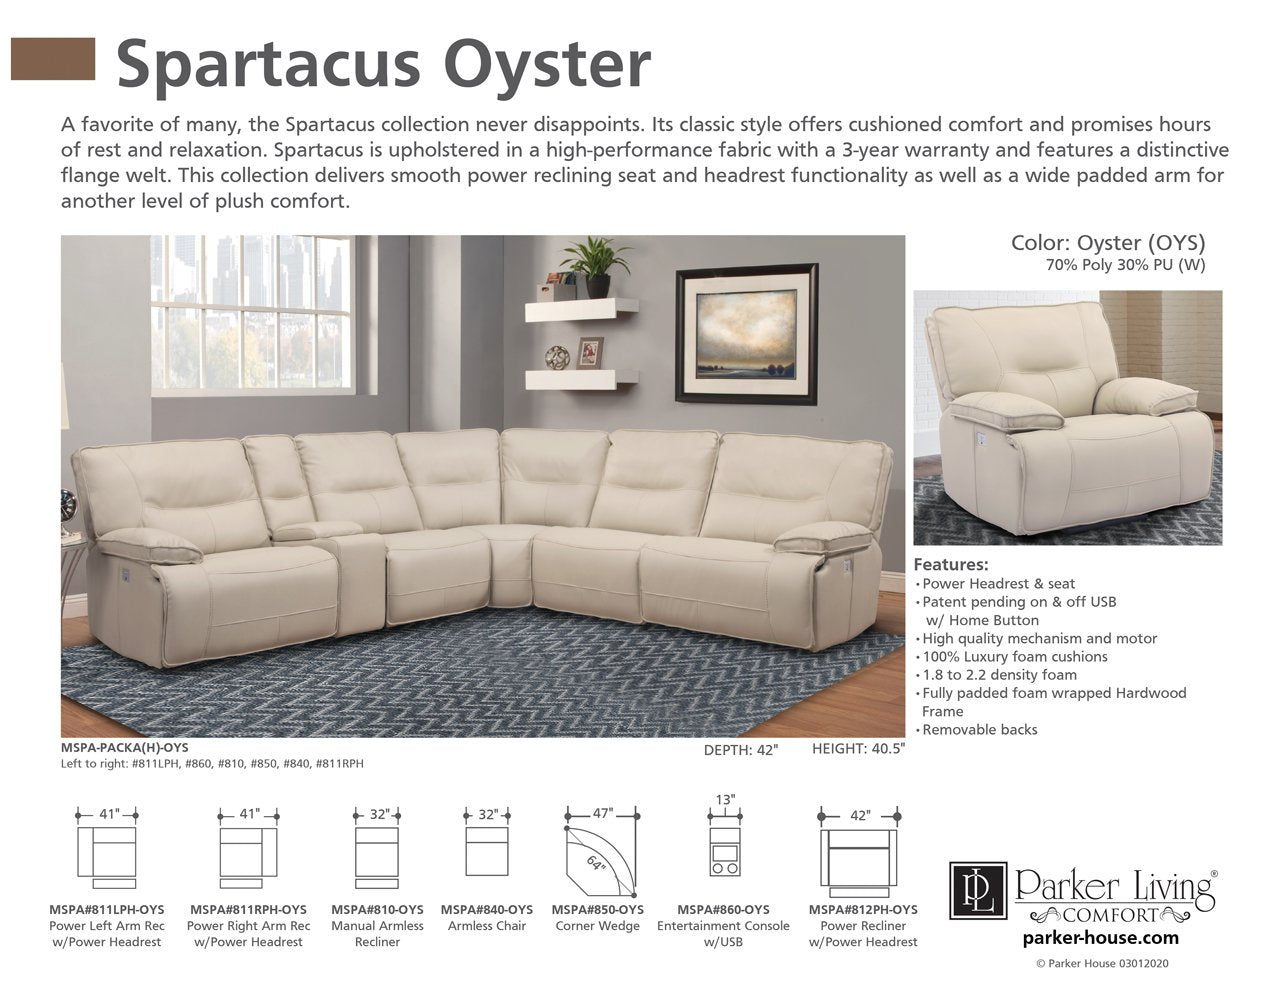 SPARTACUS - OYSTER 6PC PACKAGE A (811LPH, 810, 850, 840, 860, 811RPH)